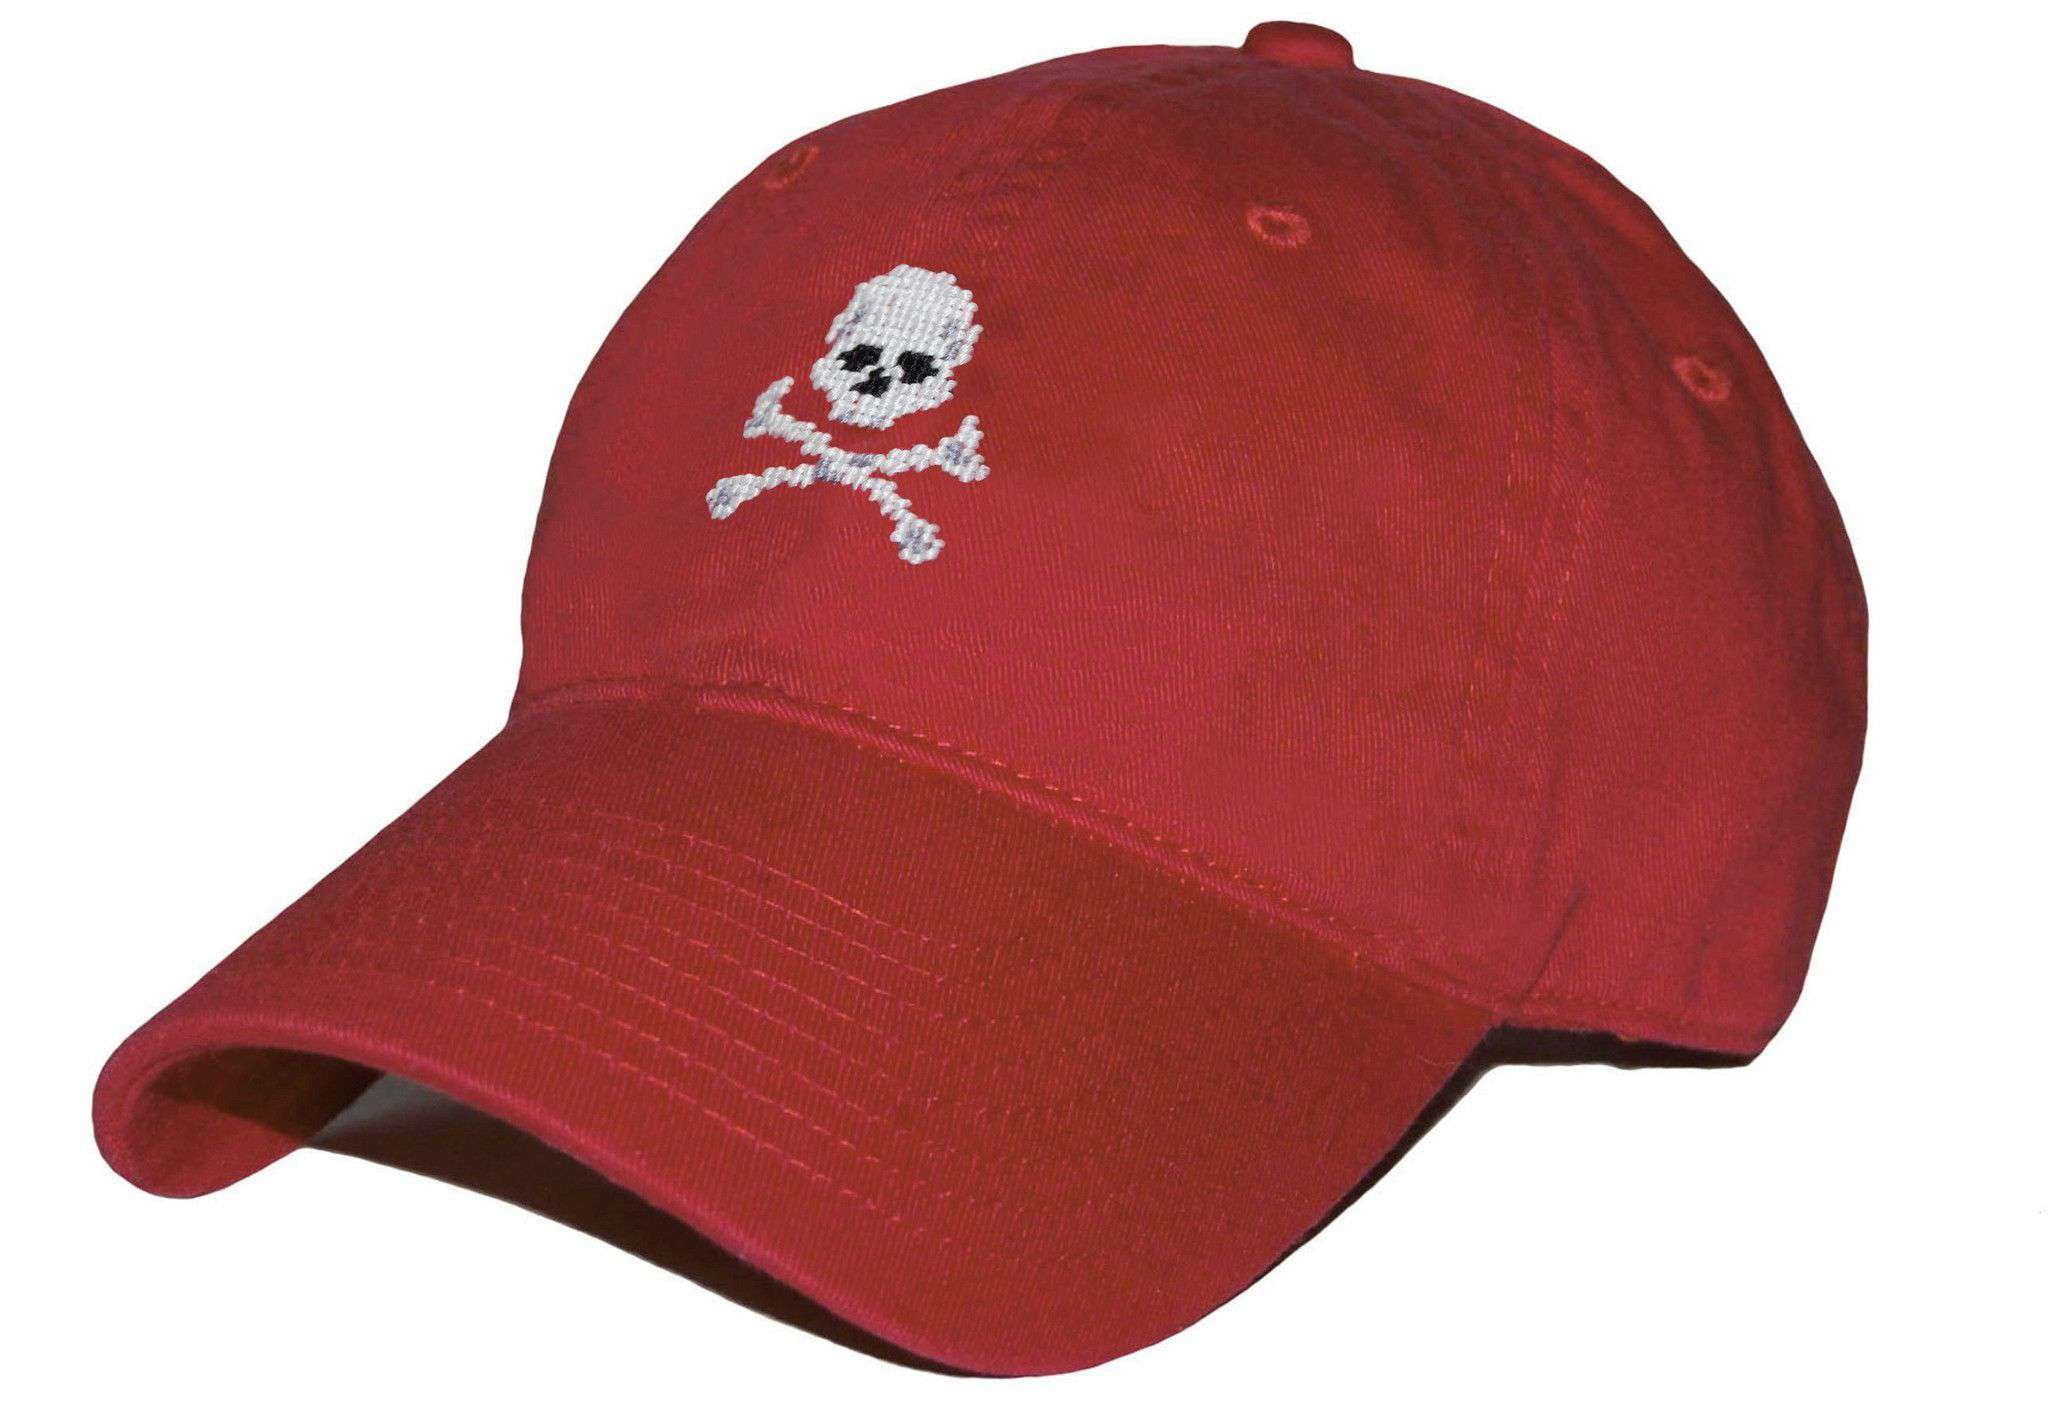 Jolly Roger Needlepoint Hat in Rust by Smathers & Branson - Country Club Prep